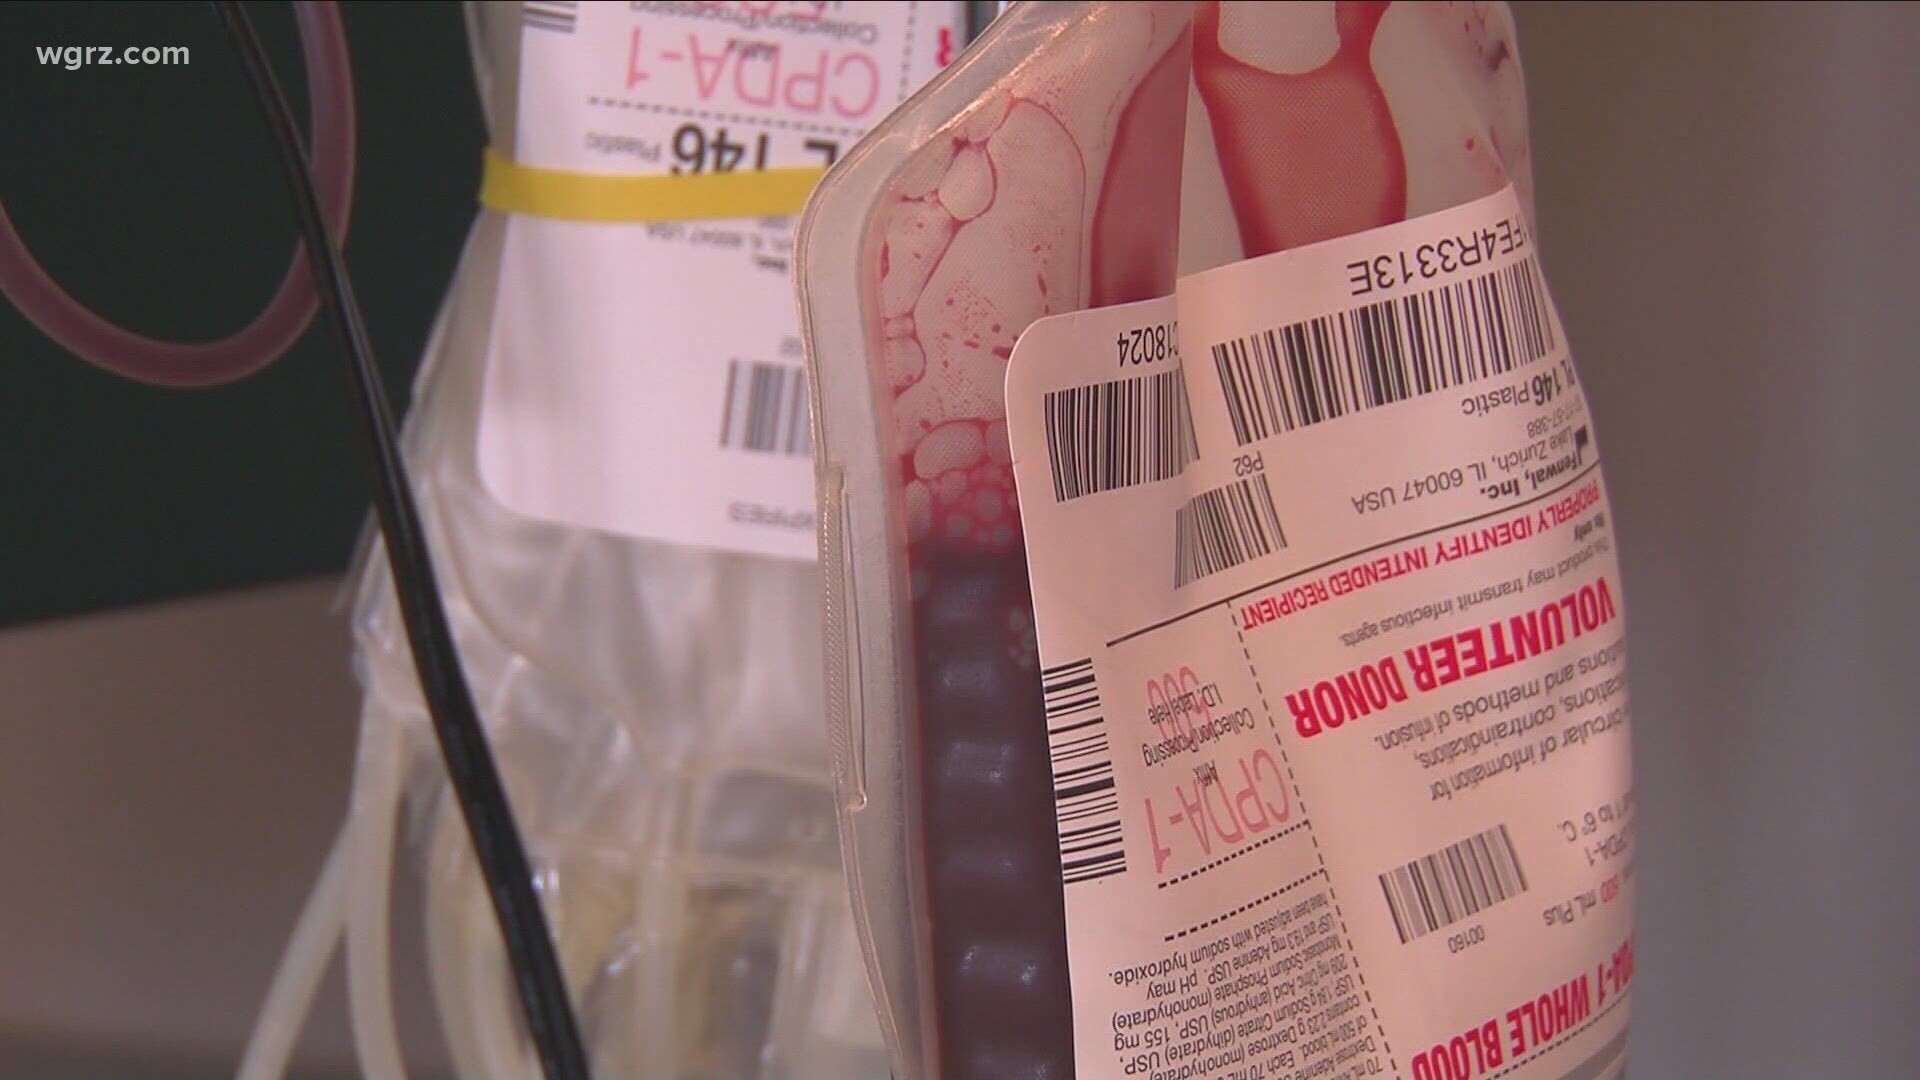 The group says it has less than a one day supply of type o blood and a 2-day supply of all other blood types.